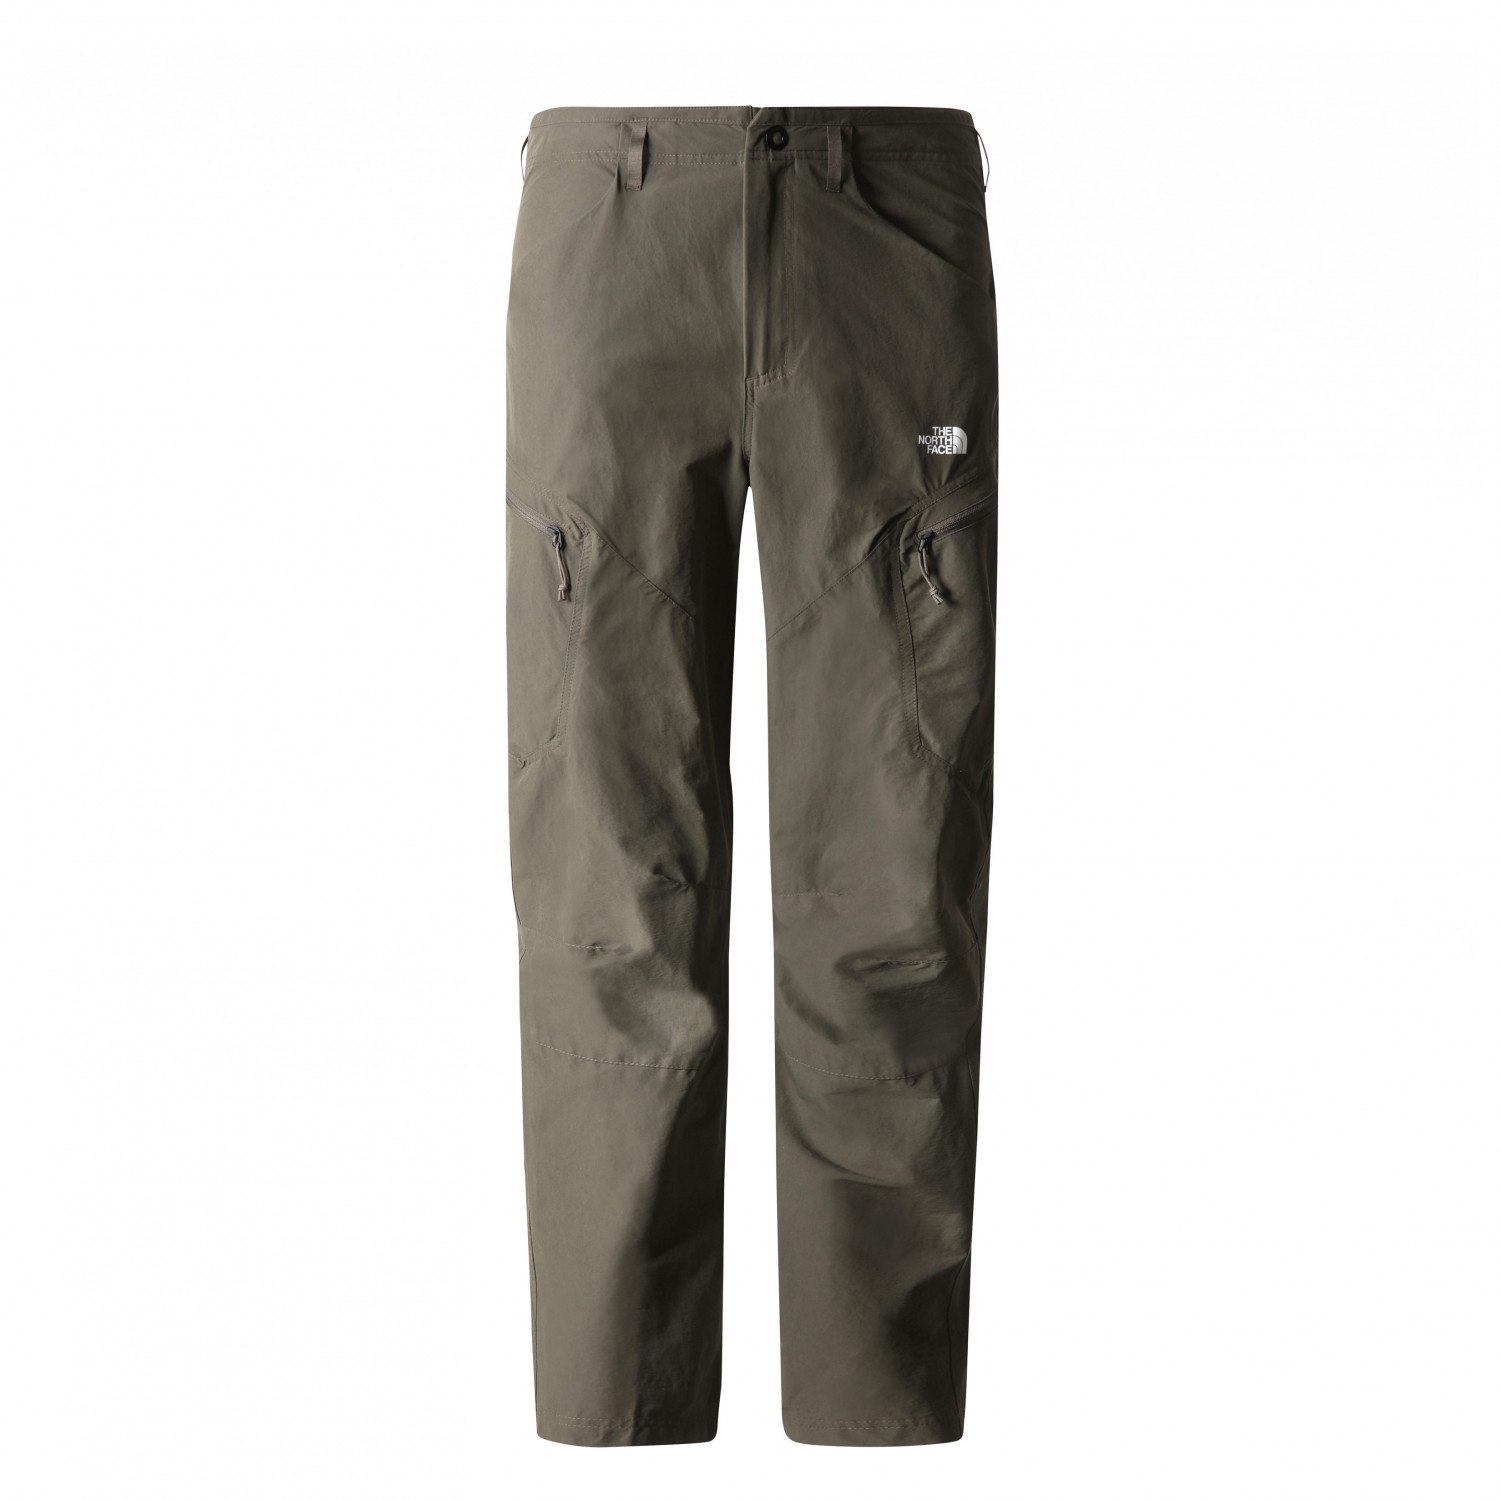 Трекинговые брюки The North Face Exploration Regular Tapered, цвет New Taupe Green pant pushpesh the indian vegetarian cookbook by pushpesh pant